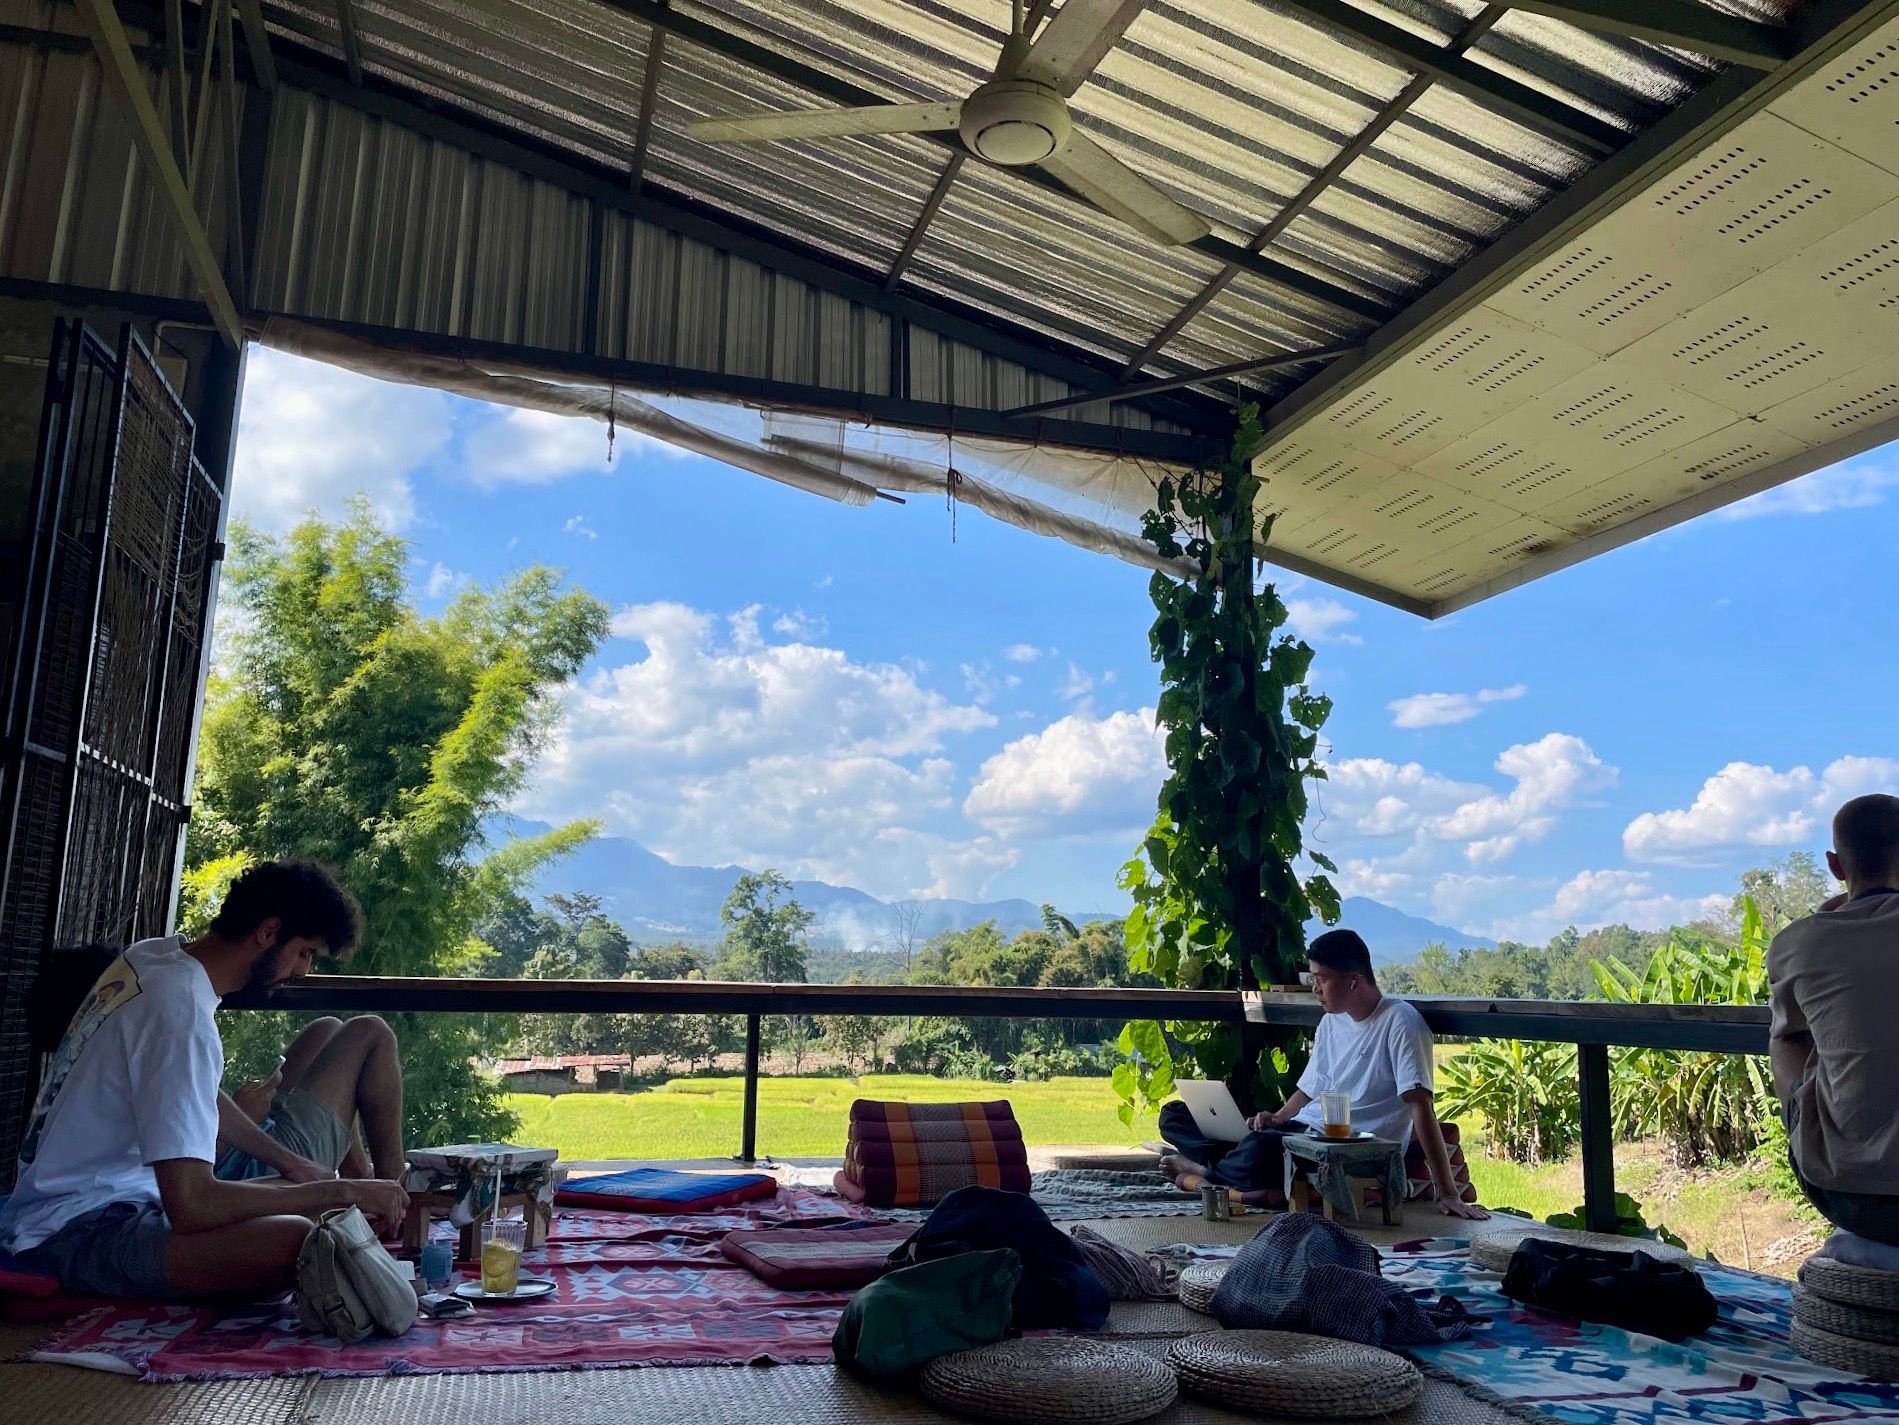 Cafe with people sitting on cushions, working on their laptop. Greenery in the background,  blue sky. Dear Your Mind, Pai, Thailand